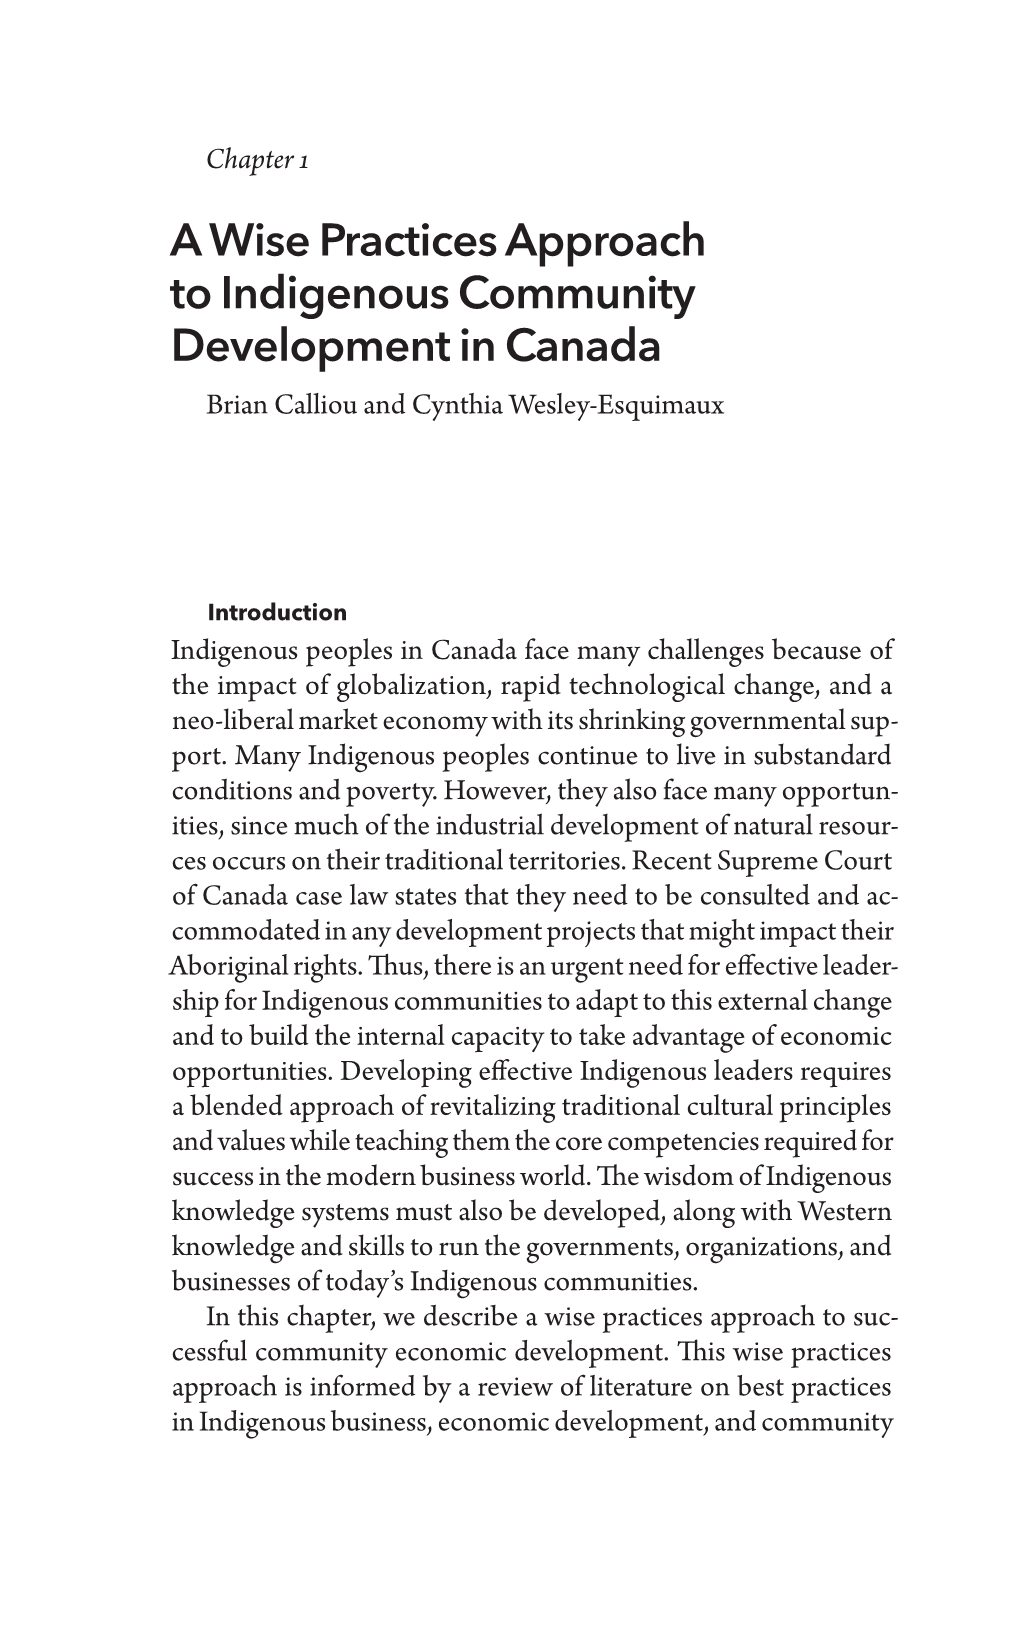 A Wise Practices Approach to Indigenous Community Development in Canada Brian Calliou and Cynthia Wesley-Esquimaux